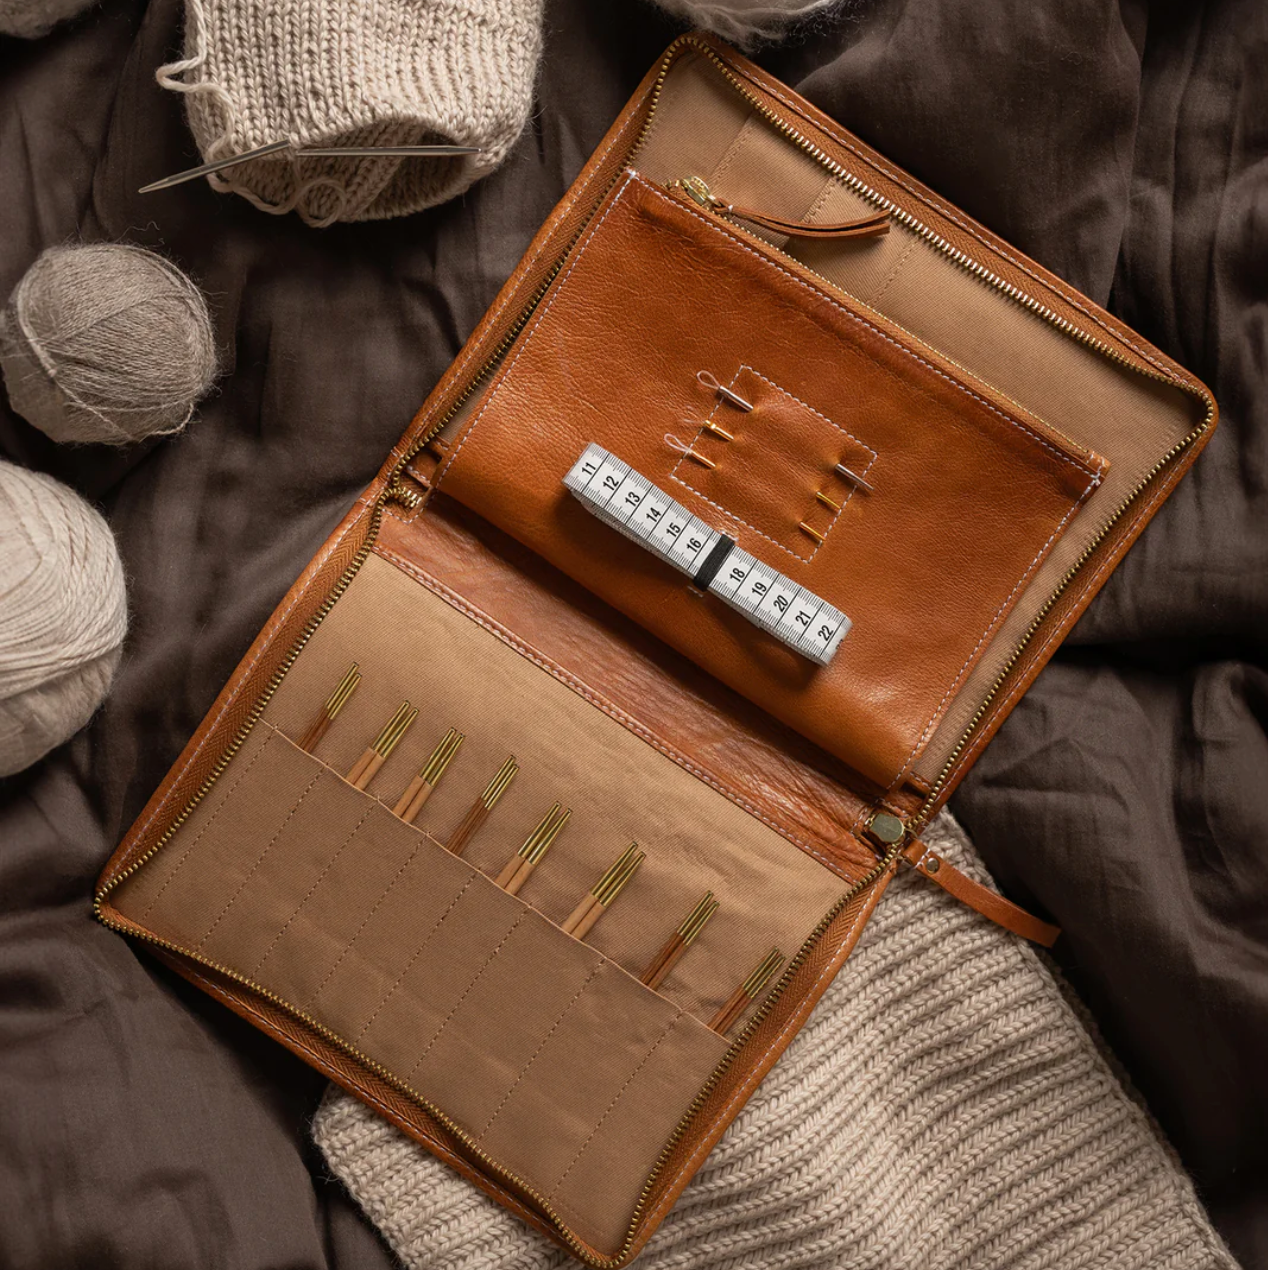 Re: Designed - Project 08 Knitting Case